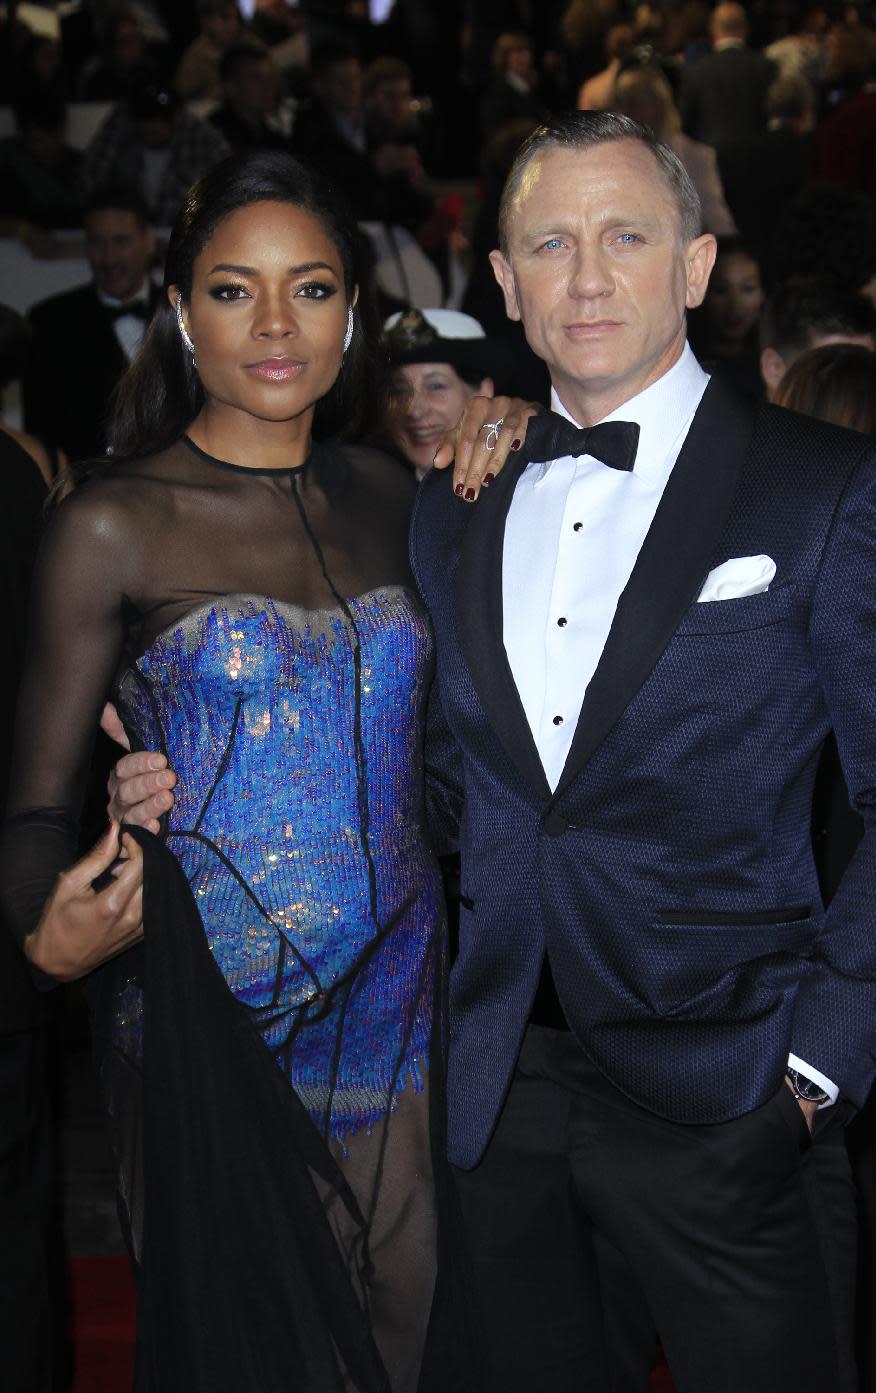 Naomie Harris, left, and Daniel Craig arrive at the world premiere of "Skyfall" at the Royal Albert Hall on Tuesday, Oct. 23, 2012 in London. (Photo by Joel Ryan/Invision/AP)